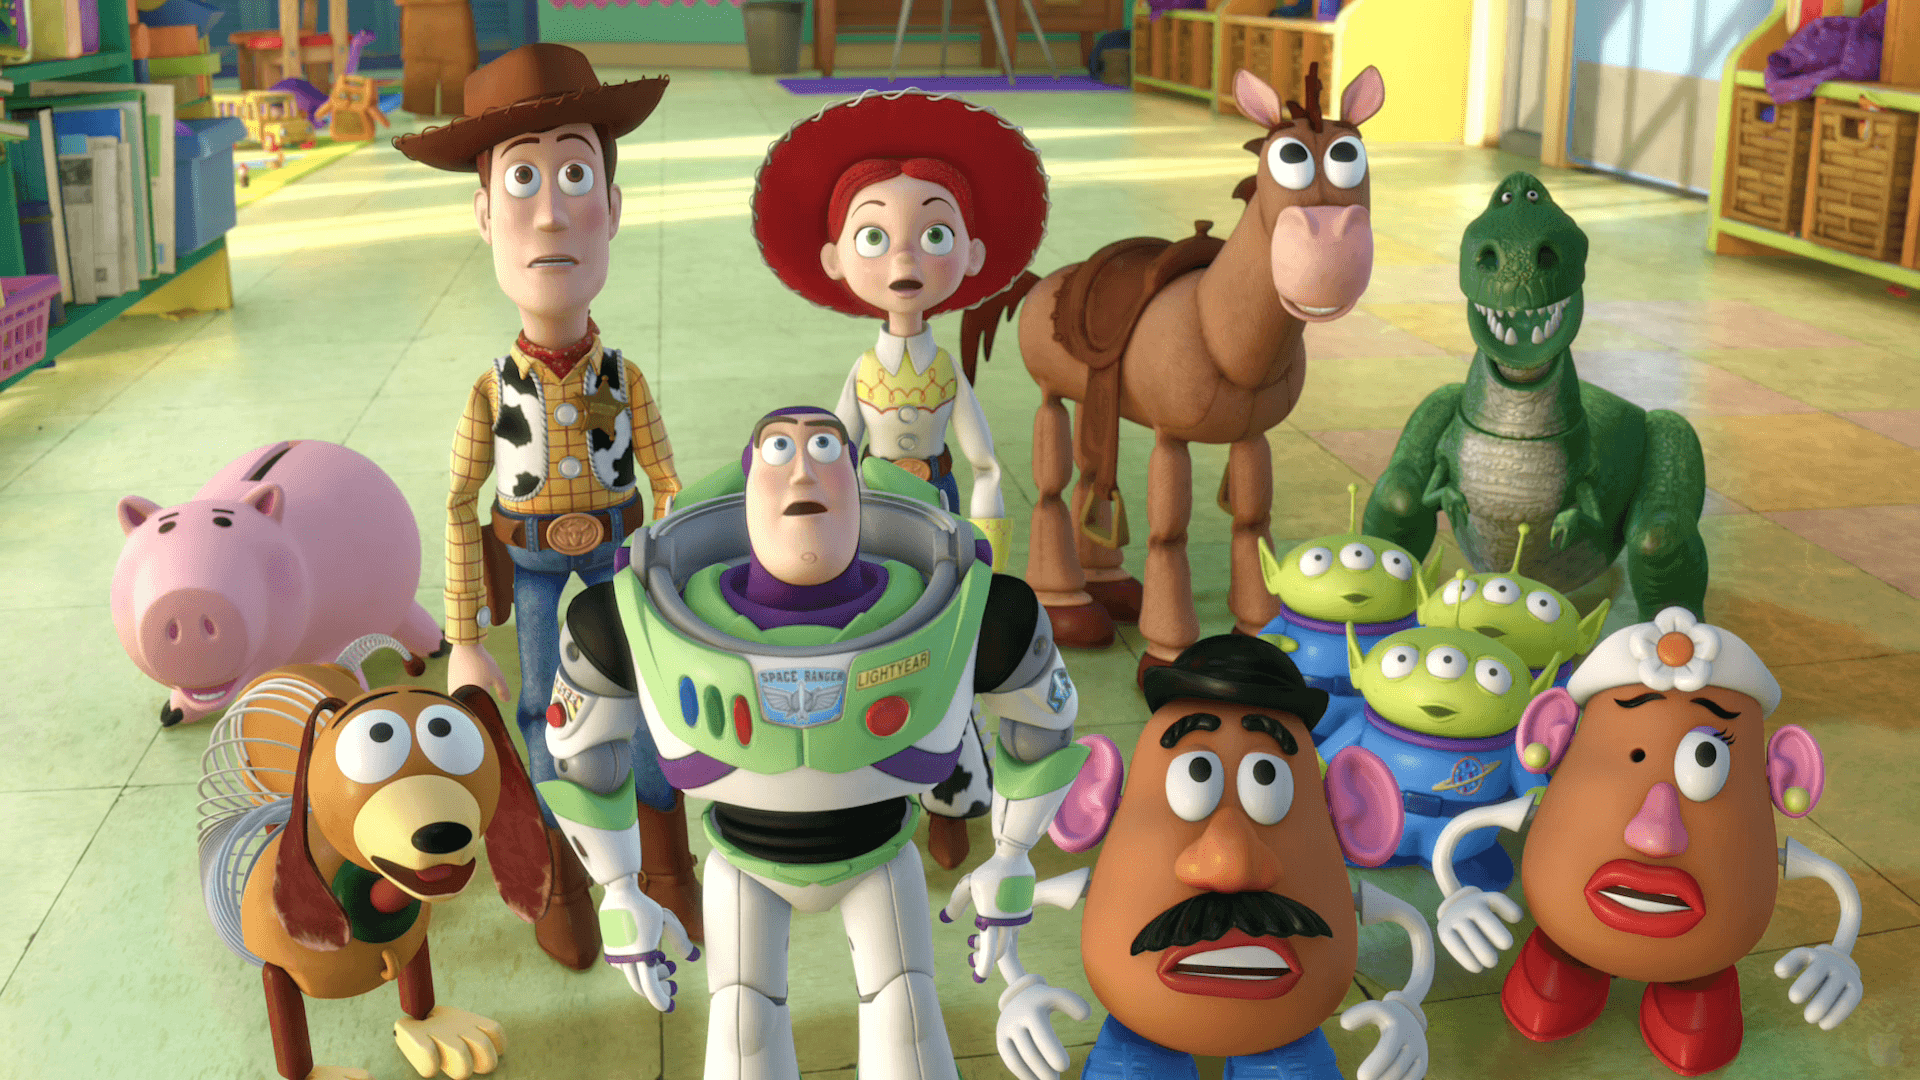 Toy Story 3 Wallpaper 368970